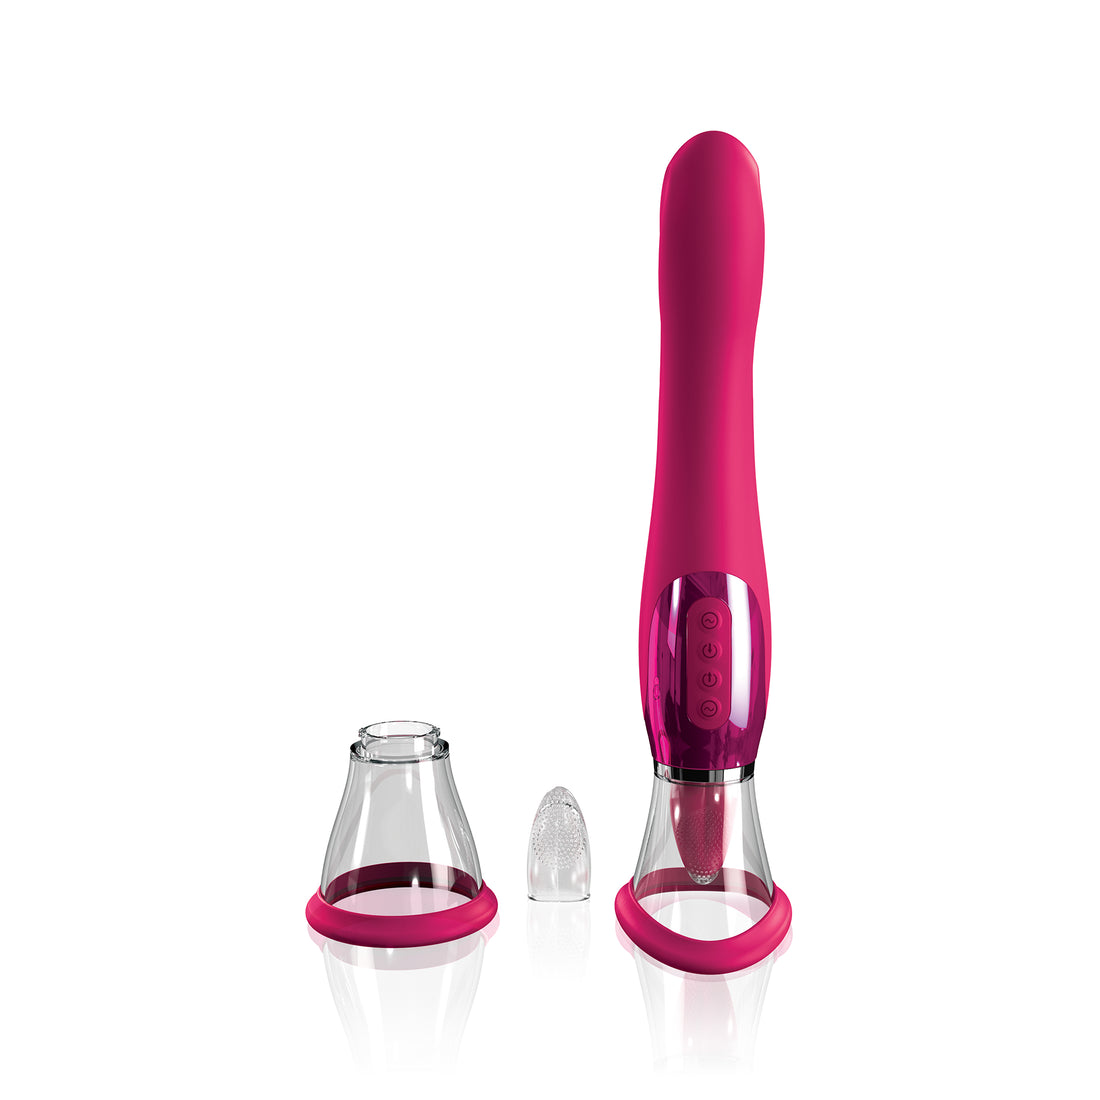 Apex vulva suction, clitoral and g-spot stimulator in JJ-pink coral featured with additional vulva suction cup and textured tongue sleeve